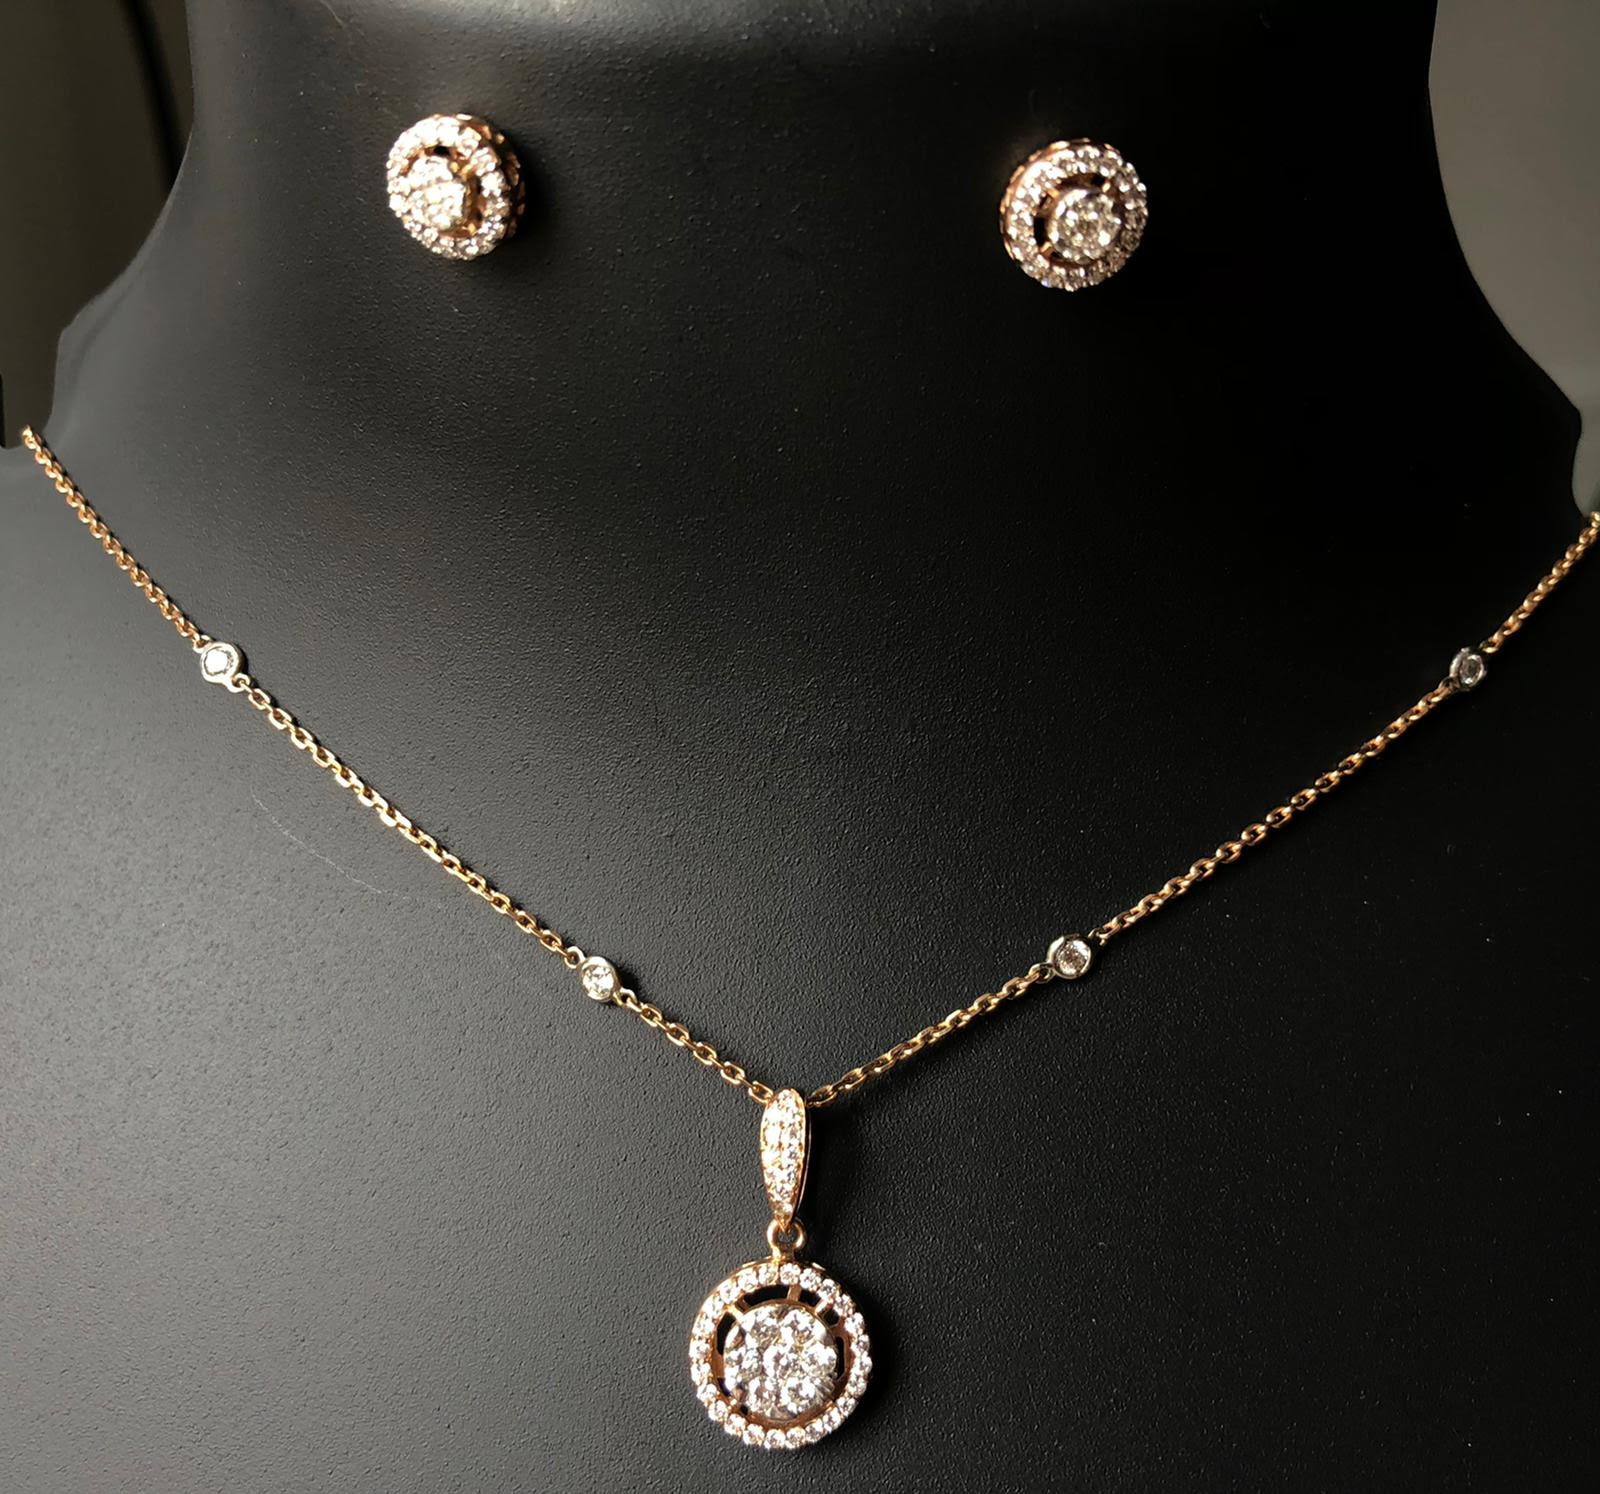 Beautiful 2.08 Carat Diamond Necklace and Earrings Set With 18k Gold - Image 6 of 12